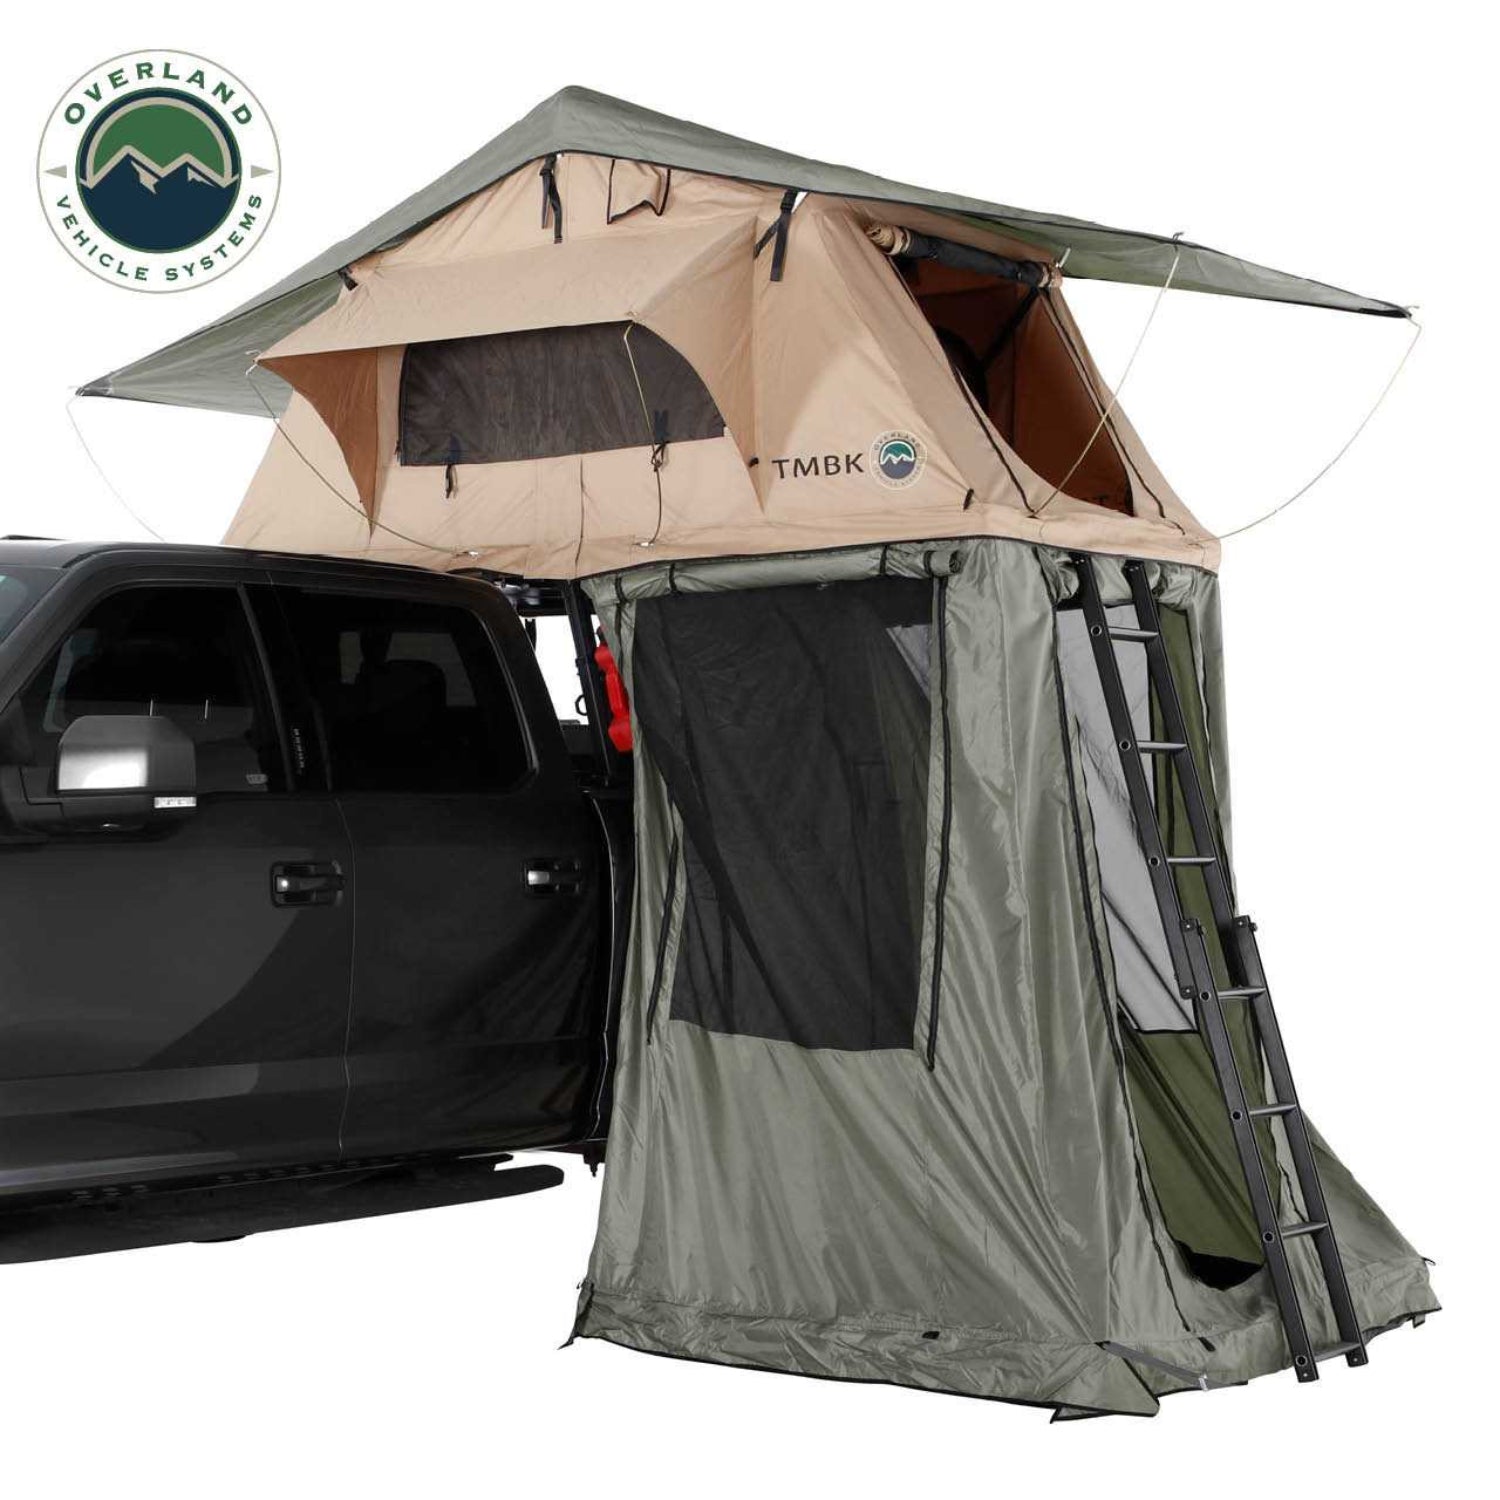 Overland Vehicle Systems Tmbk Roof Top Tent Annex Green Base With Black Floor Open view